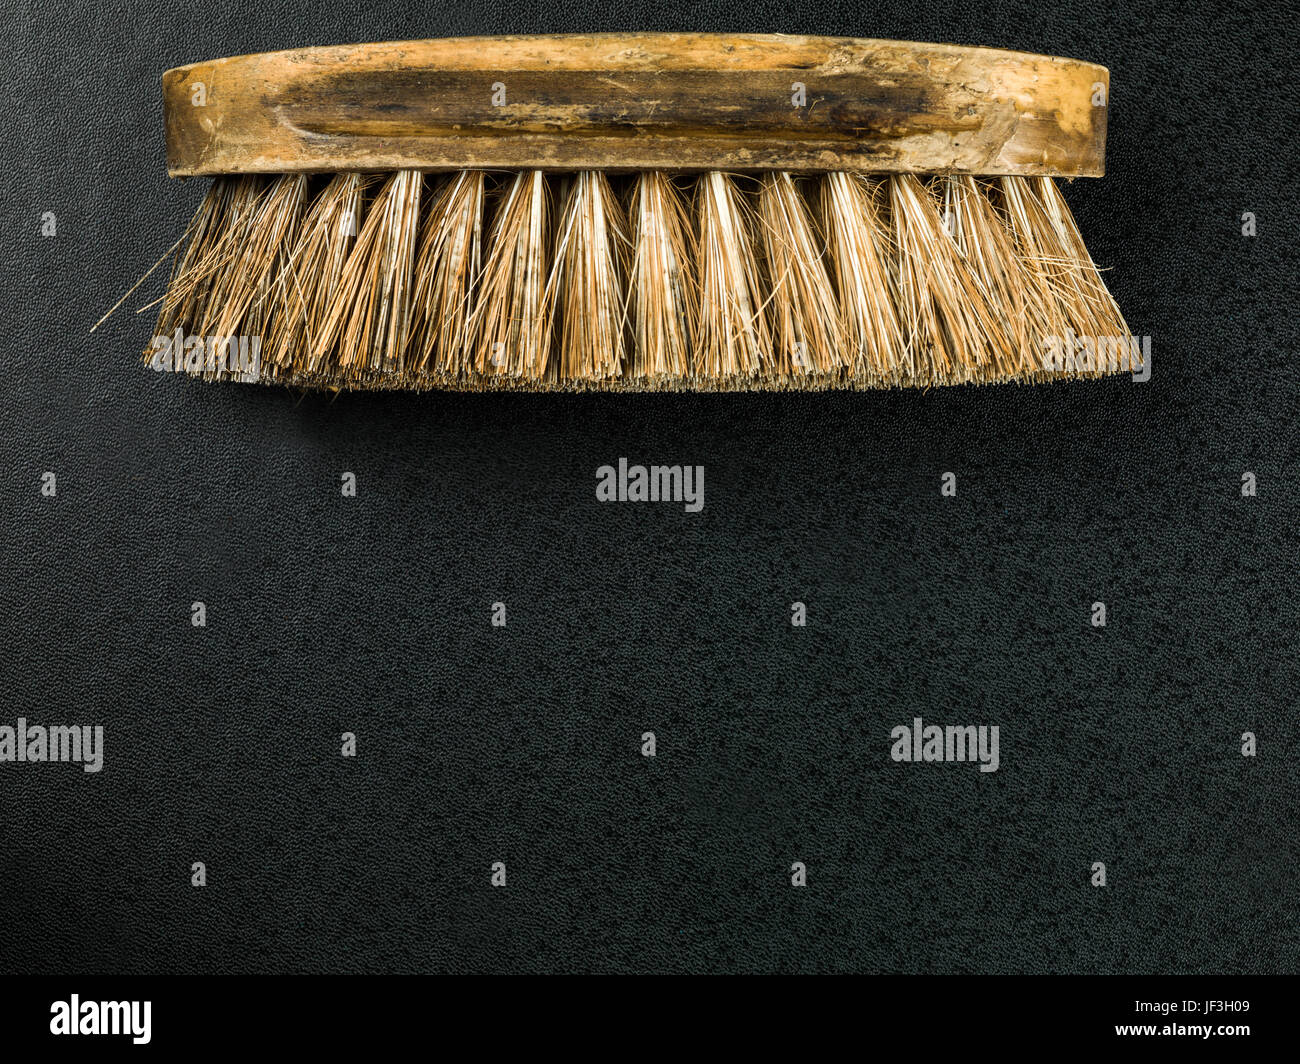 Image of a Natural Bristle Scrubbing Brush Against a Black Background Stock Photo